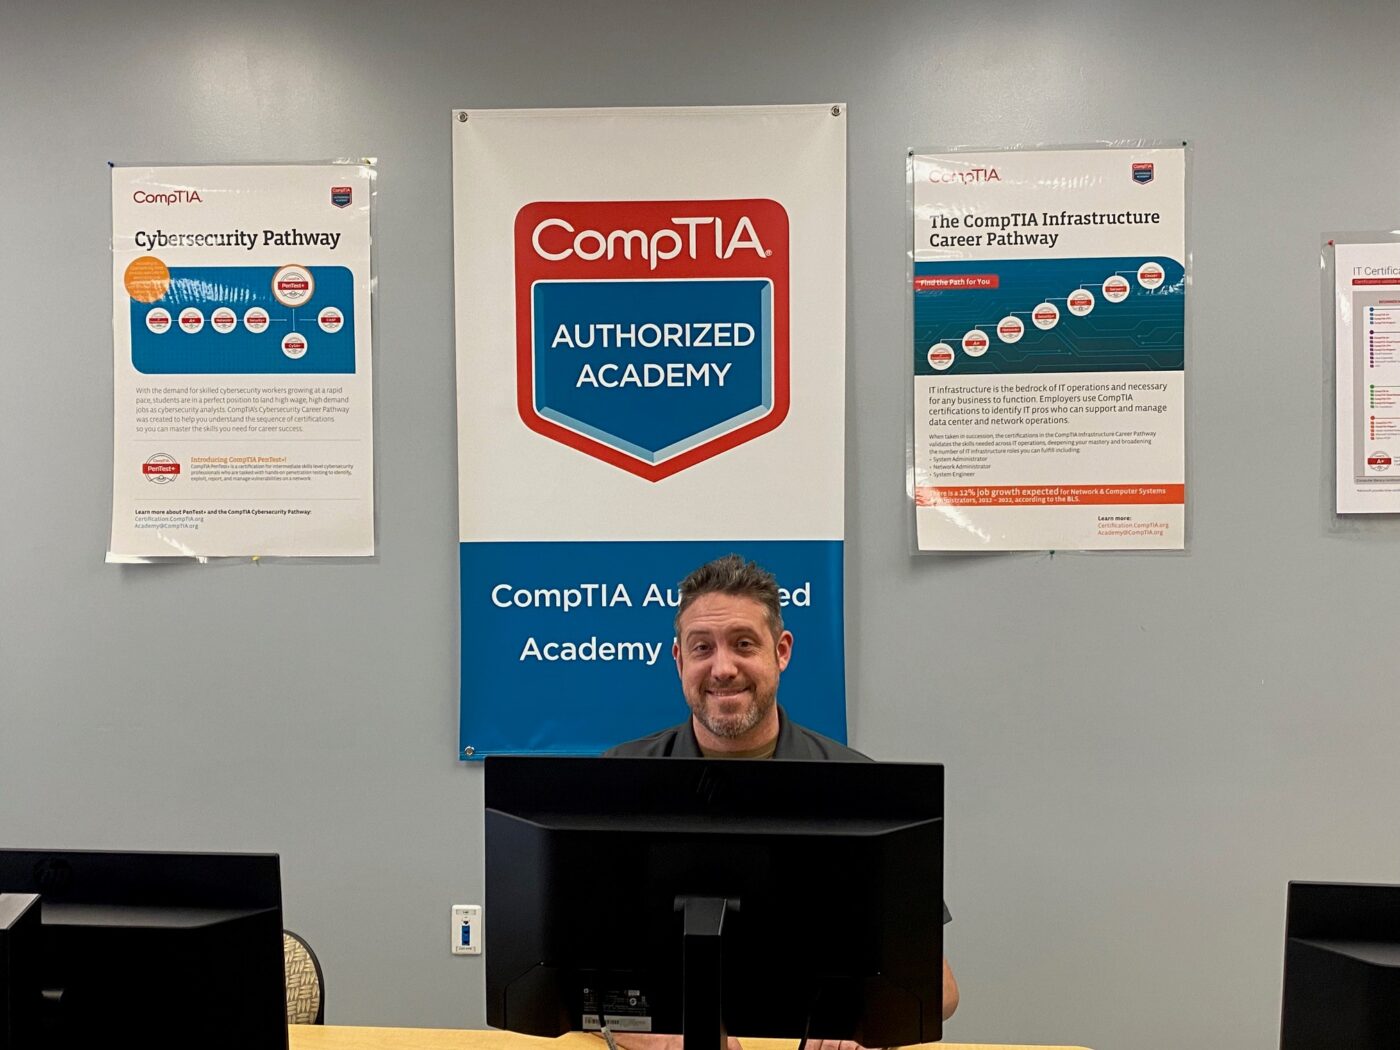 Aaron Winfree sitting behind computer with CompTIA posters in background